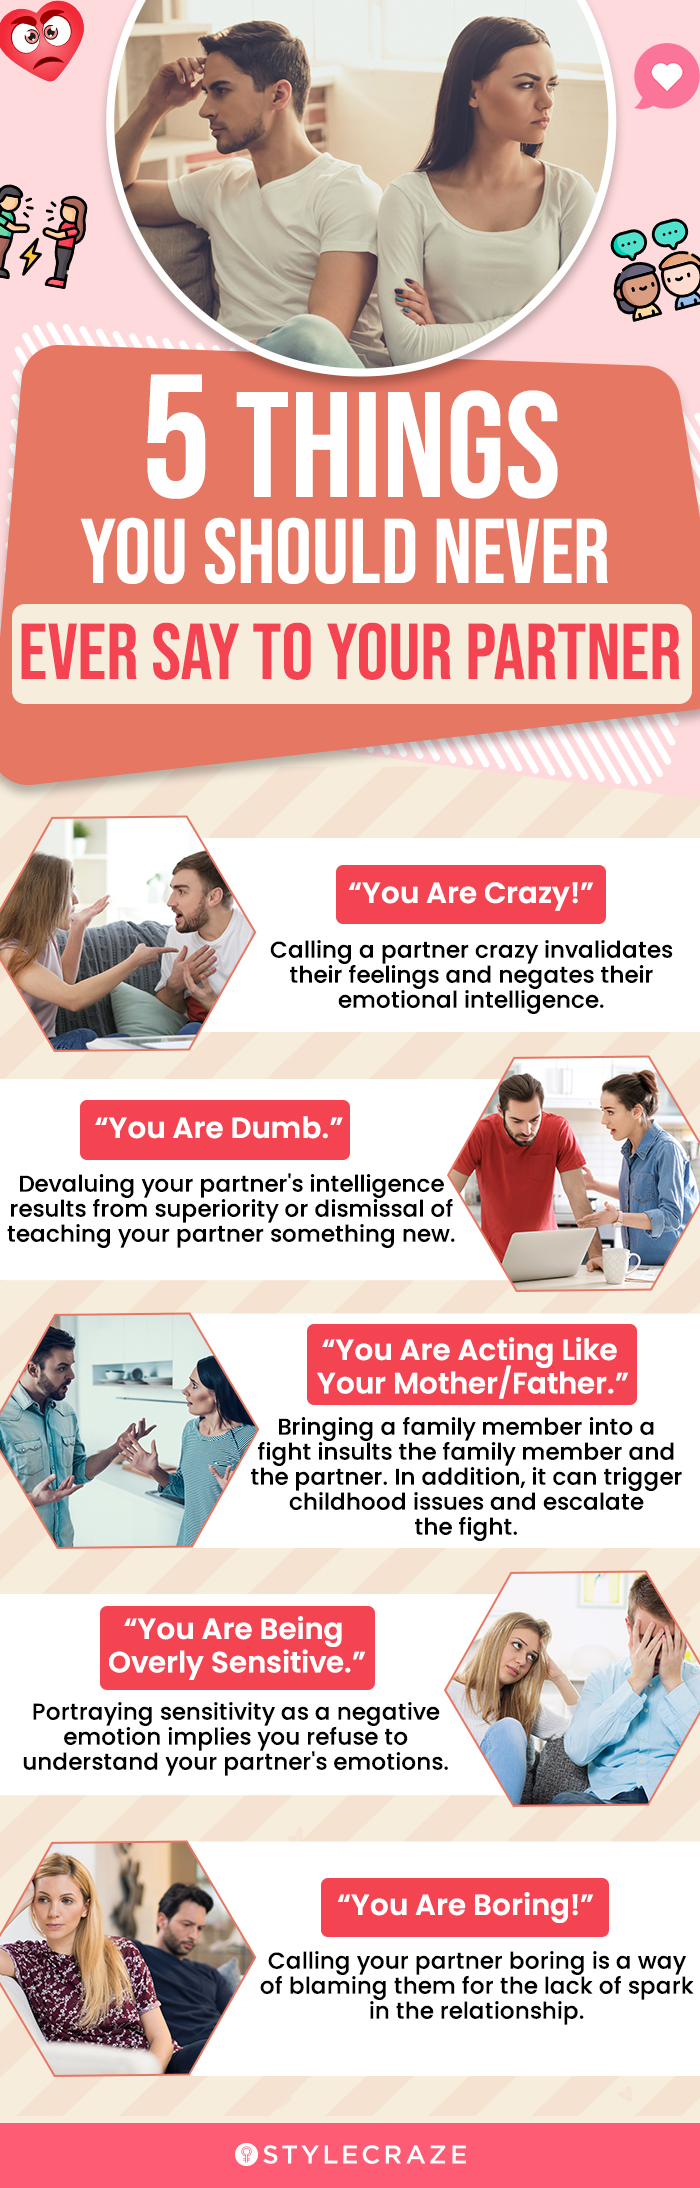 top 5 things you should never ever say to your partner (infographic)